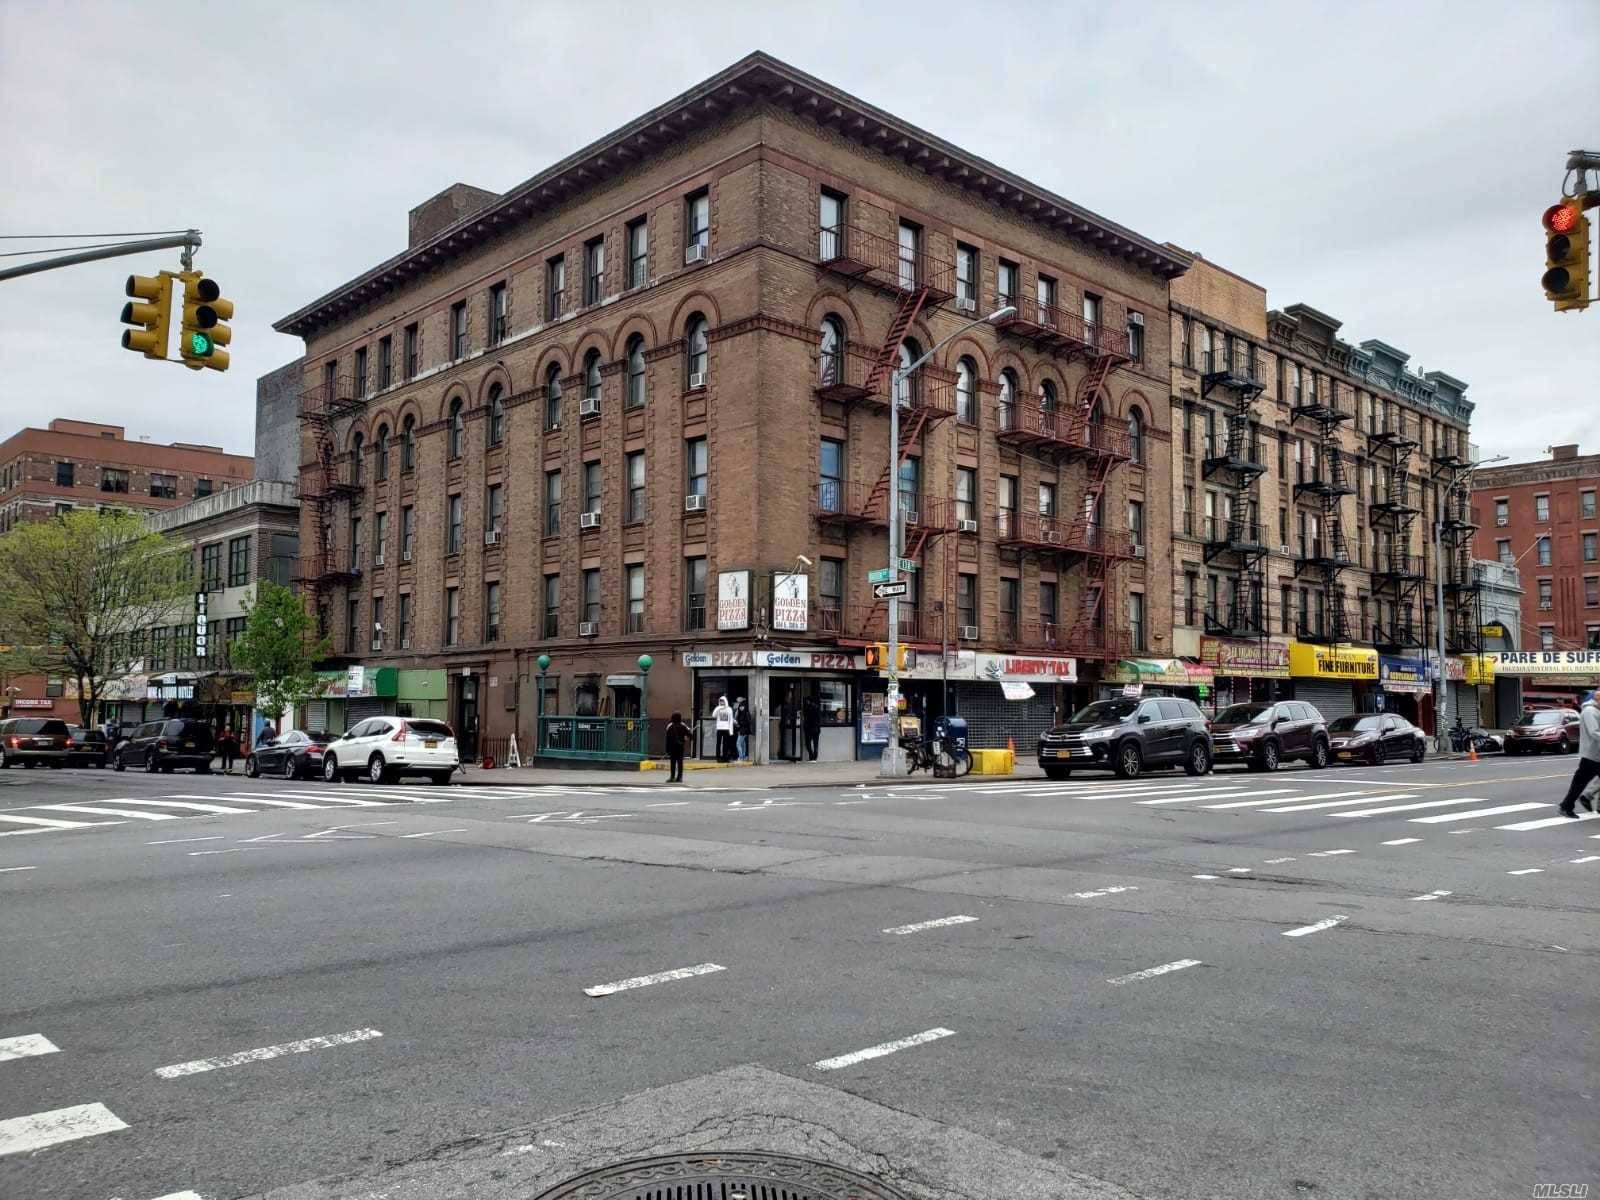 This building is located on the corner of 138th St and Brook Ave.